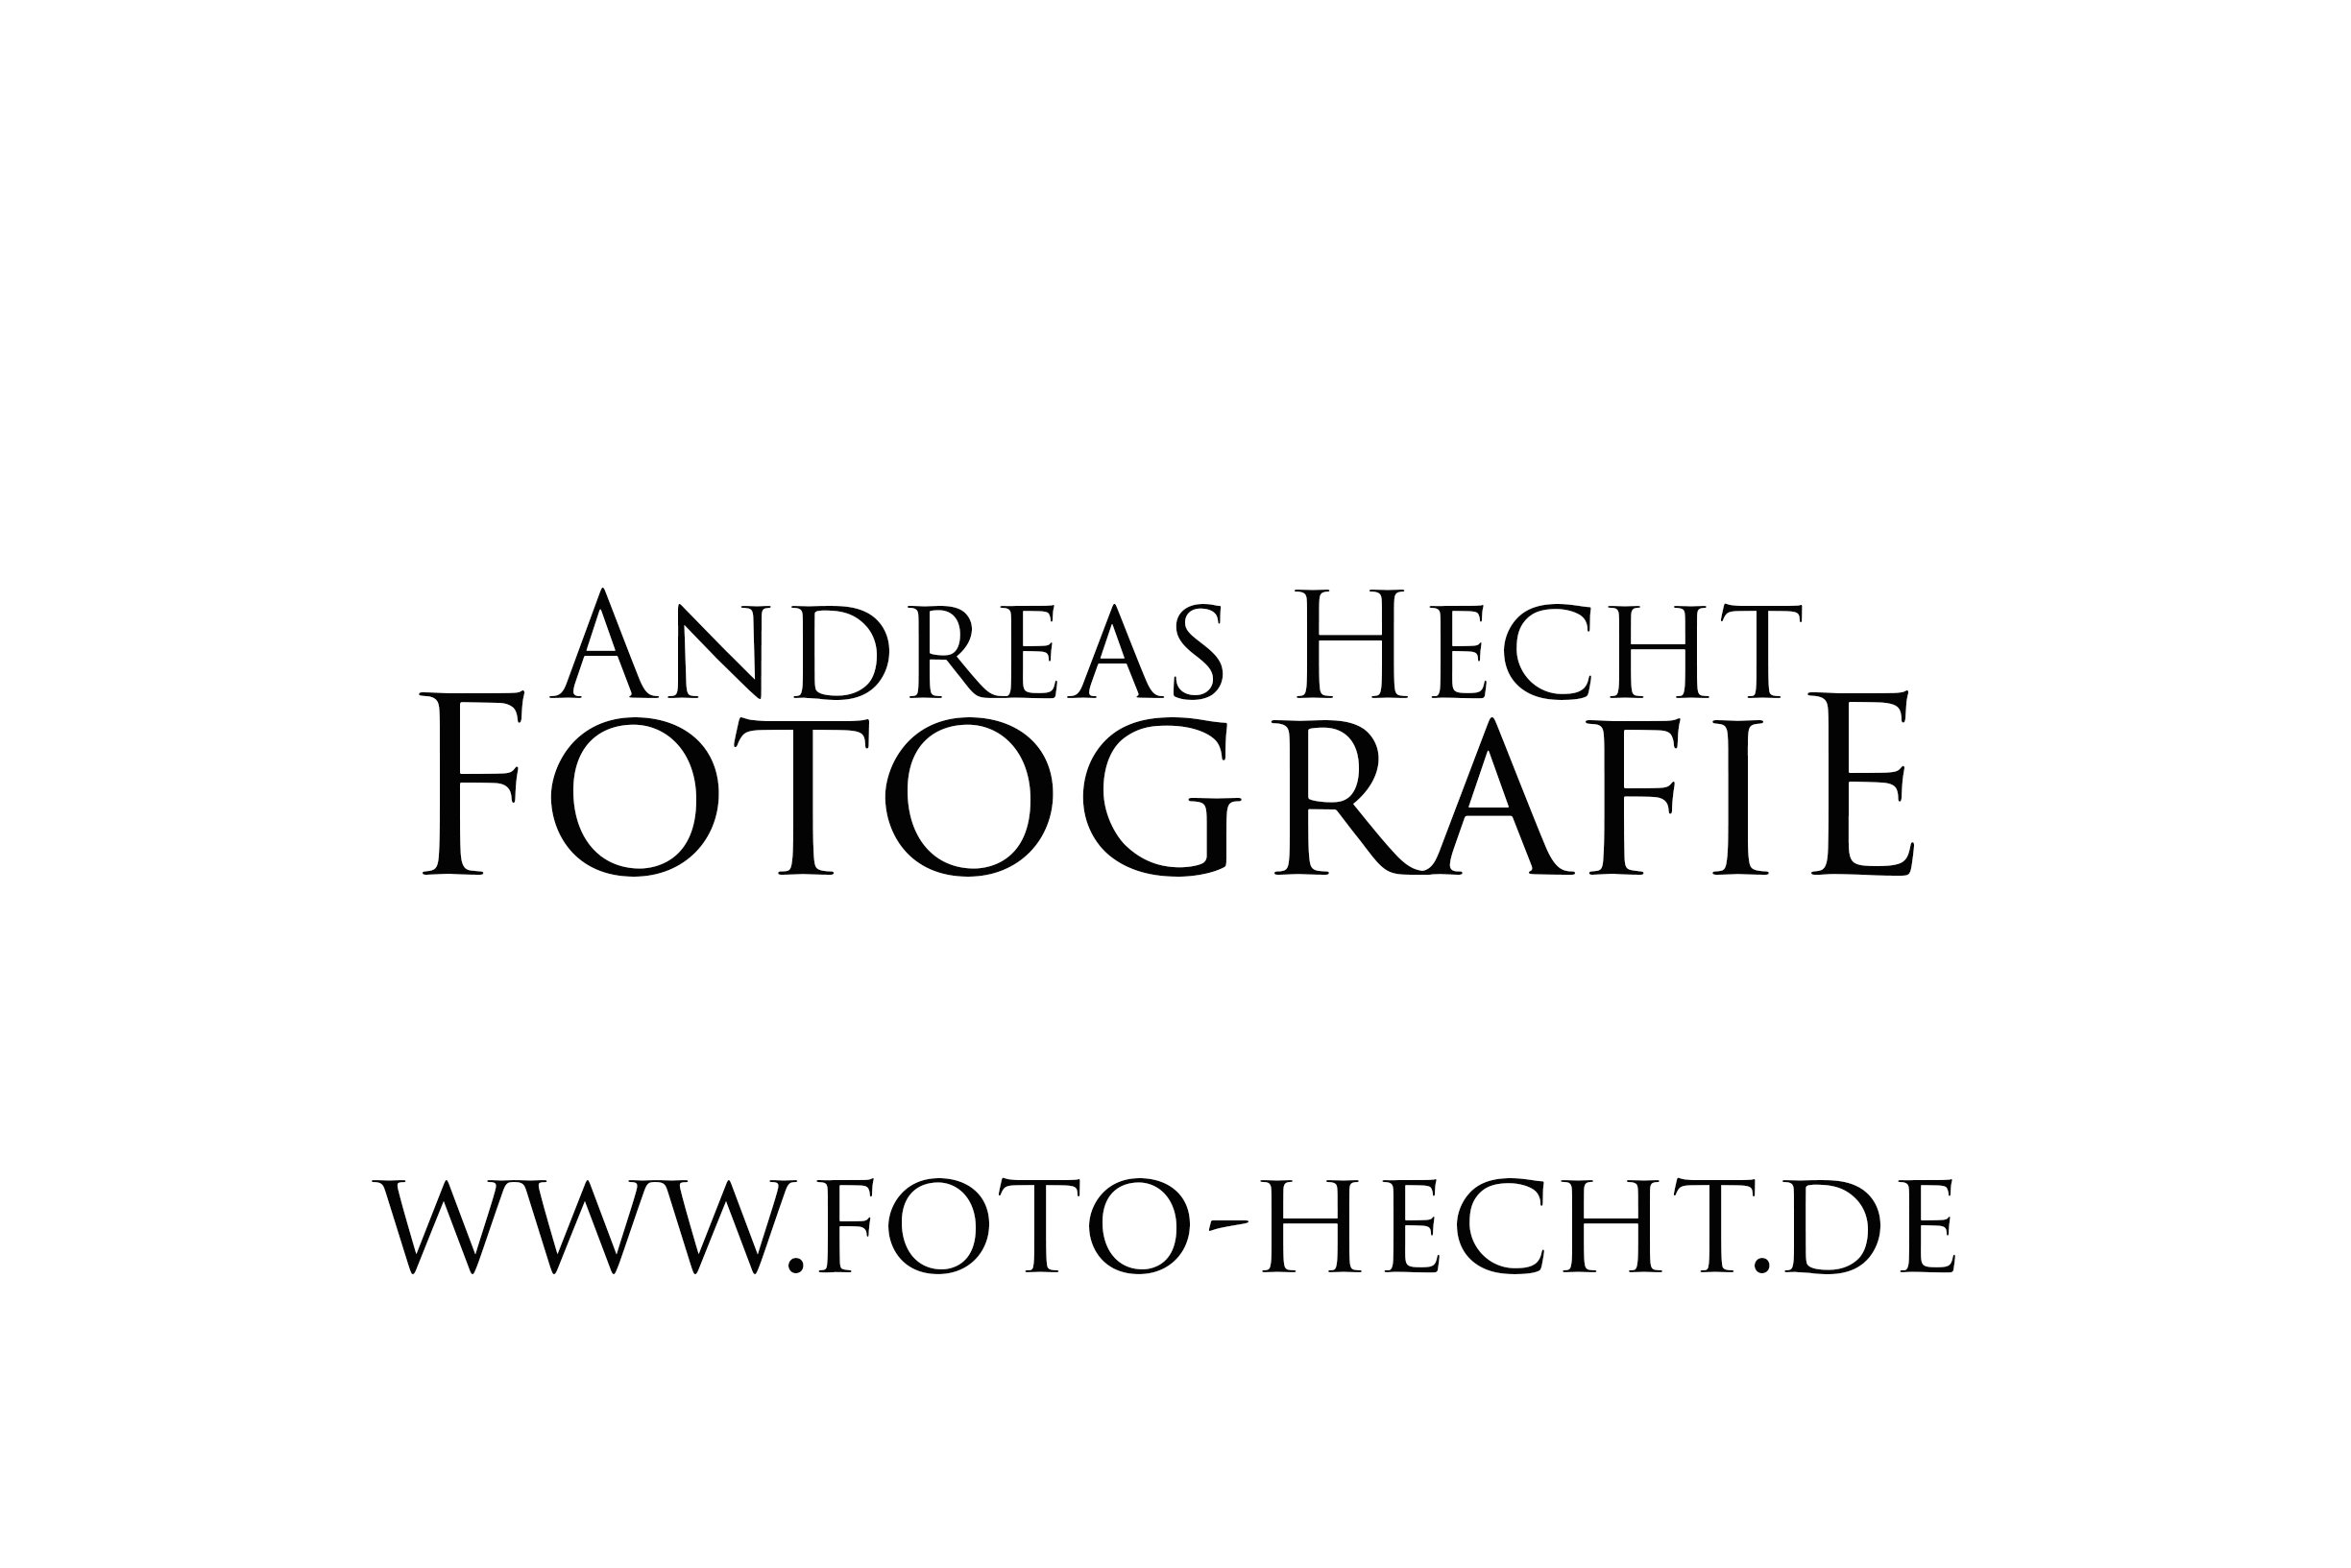 Andreas Hecht